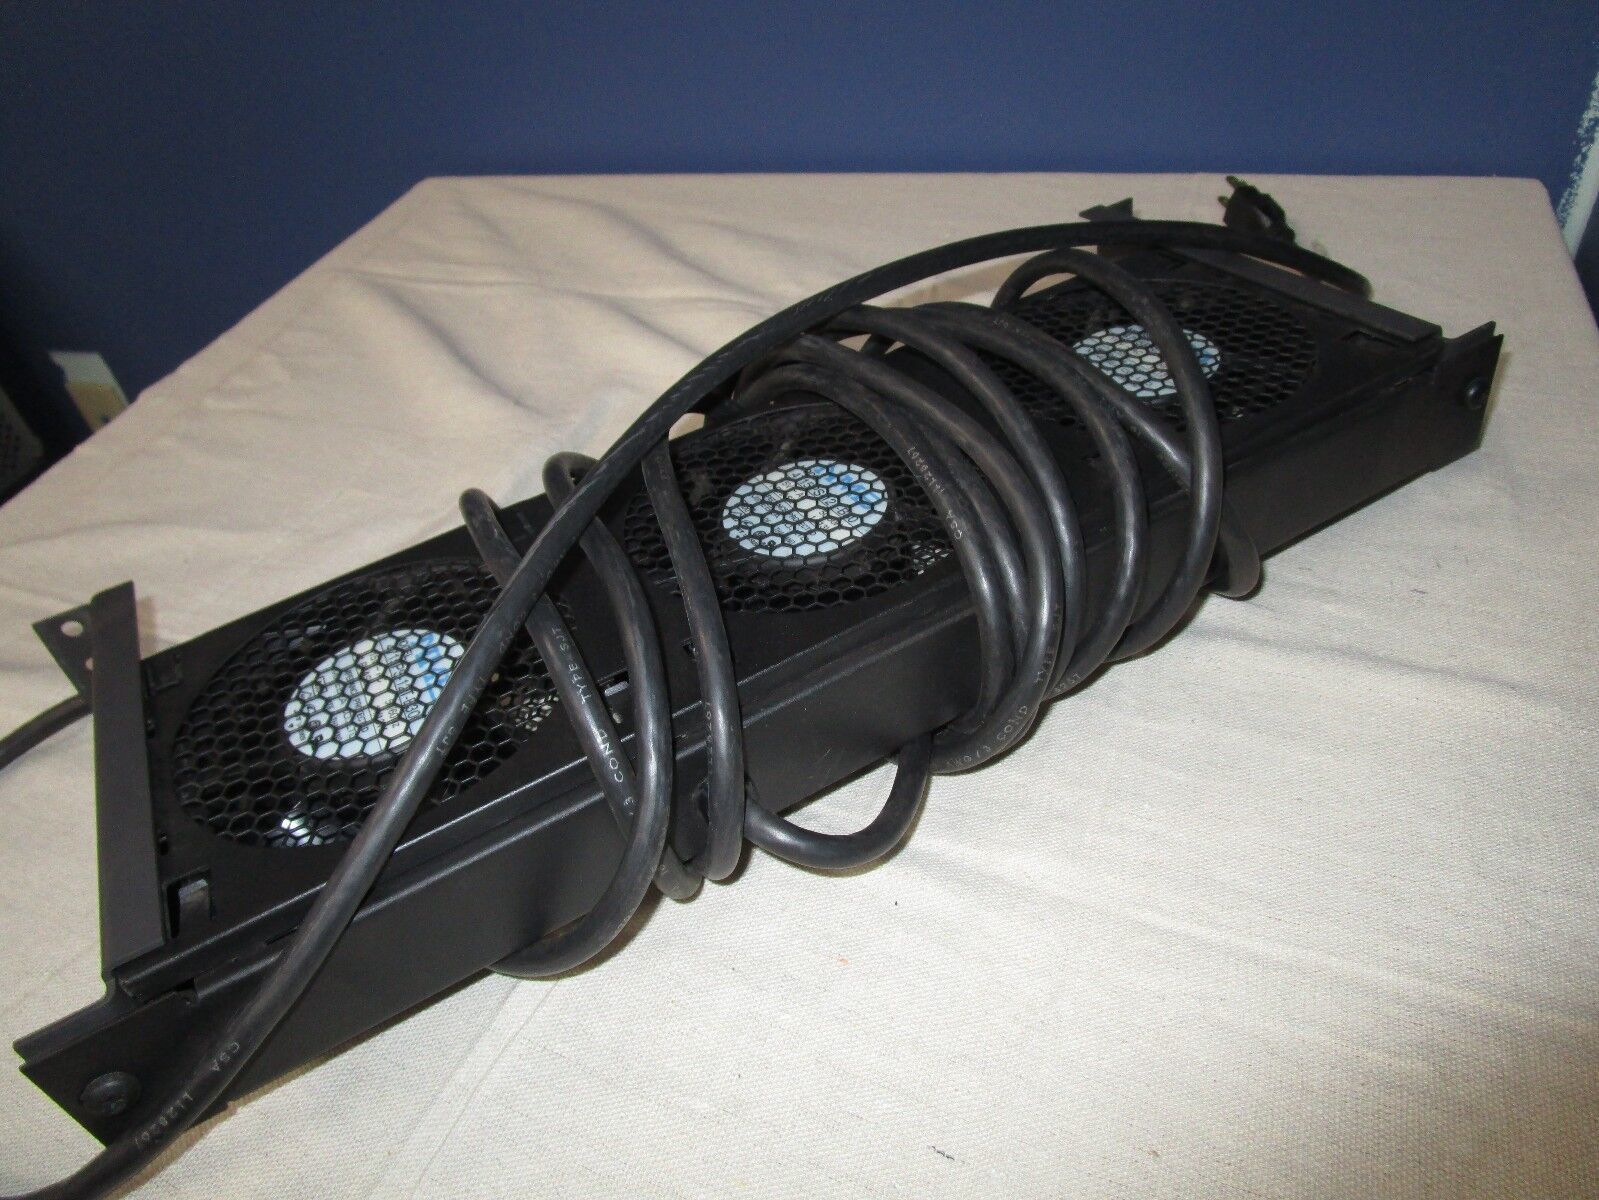 Primary image for Motorola purc 5000 triple cooling Fan Rack mount. Comes as pictured